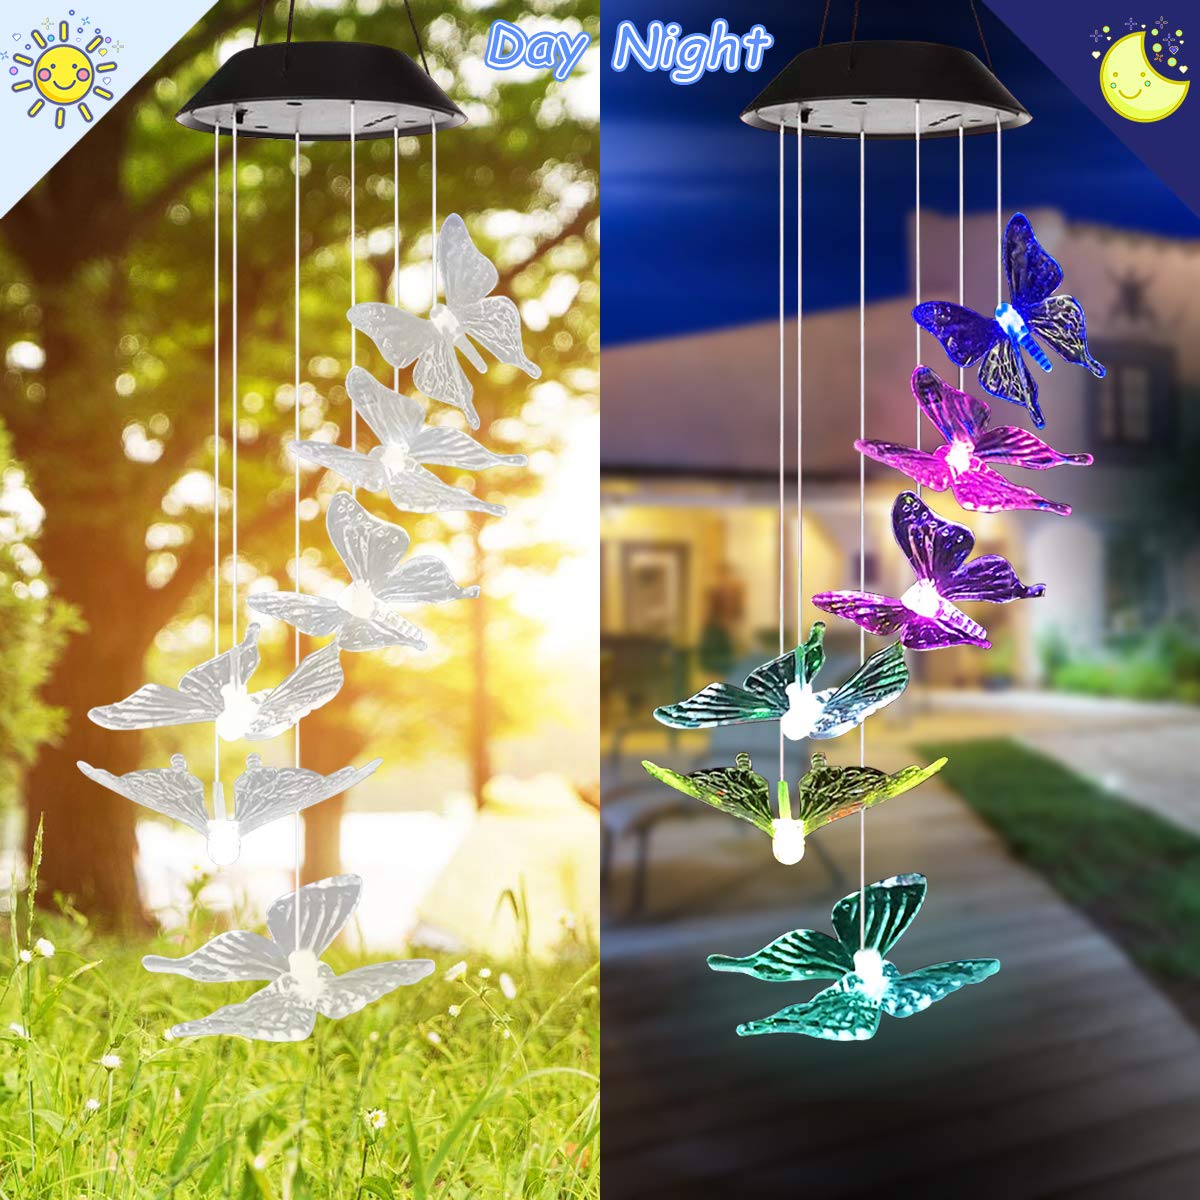 Solar Wind Chimes Outdoor, Waterproof Solar Butterfly Wind Chimes Color Changing LED Solar Powered Mobile Wind Chime, Hanging Decorative Romantic Patio Lights for Yard Garden Home Party - image 5 of 8